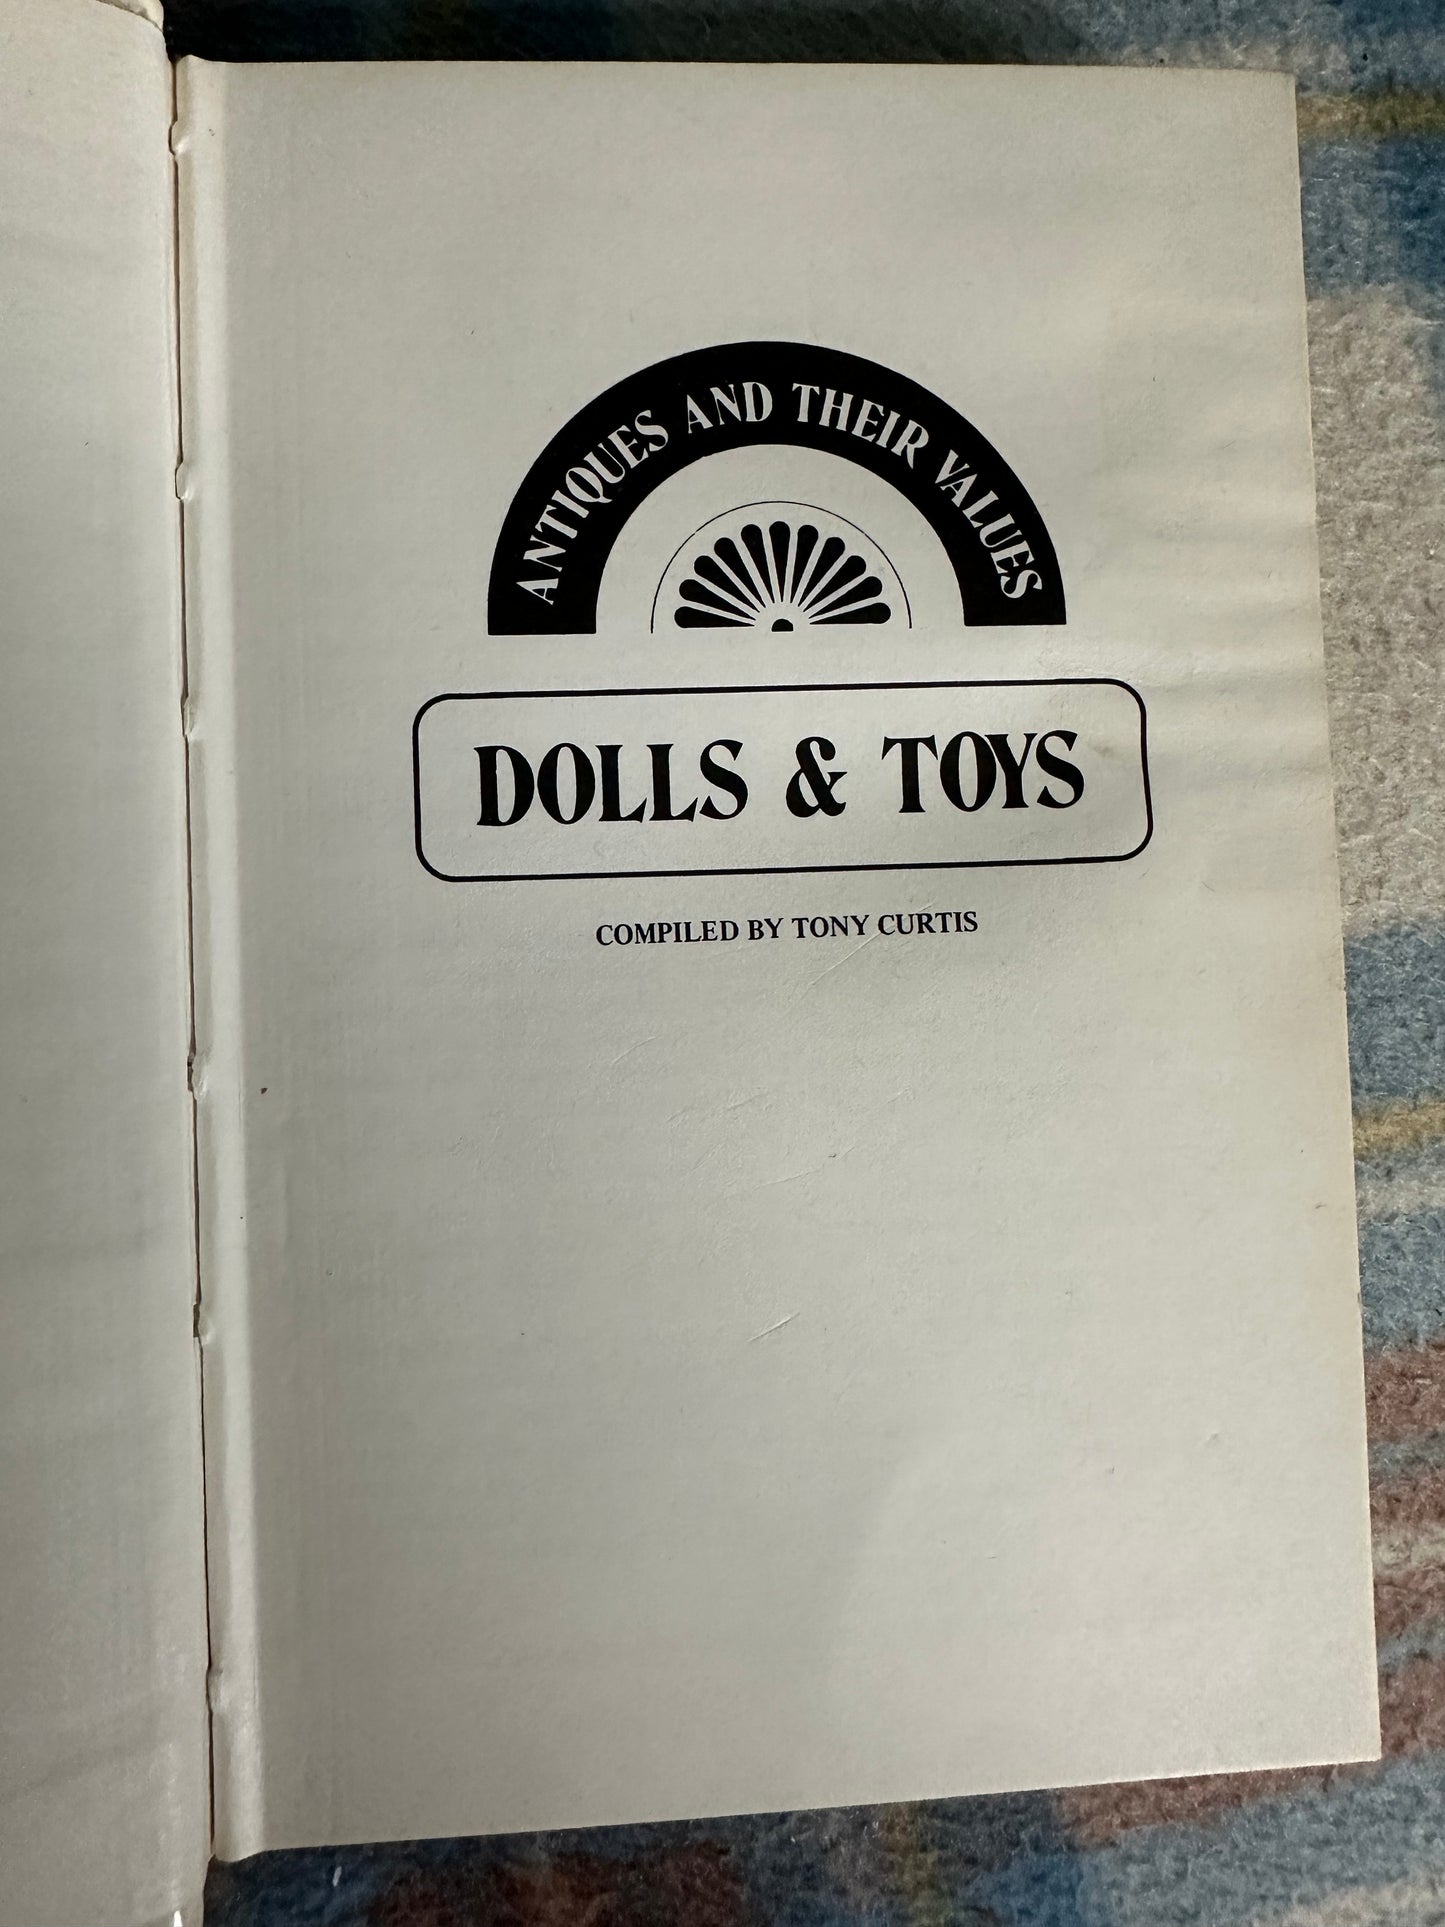 1977 Antiques & Their Values Dolls & Toys - Tony Curtis(Lyle Publications)